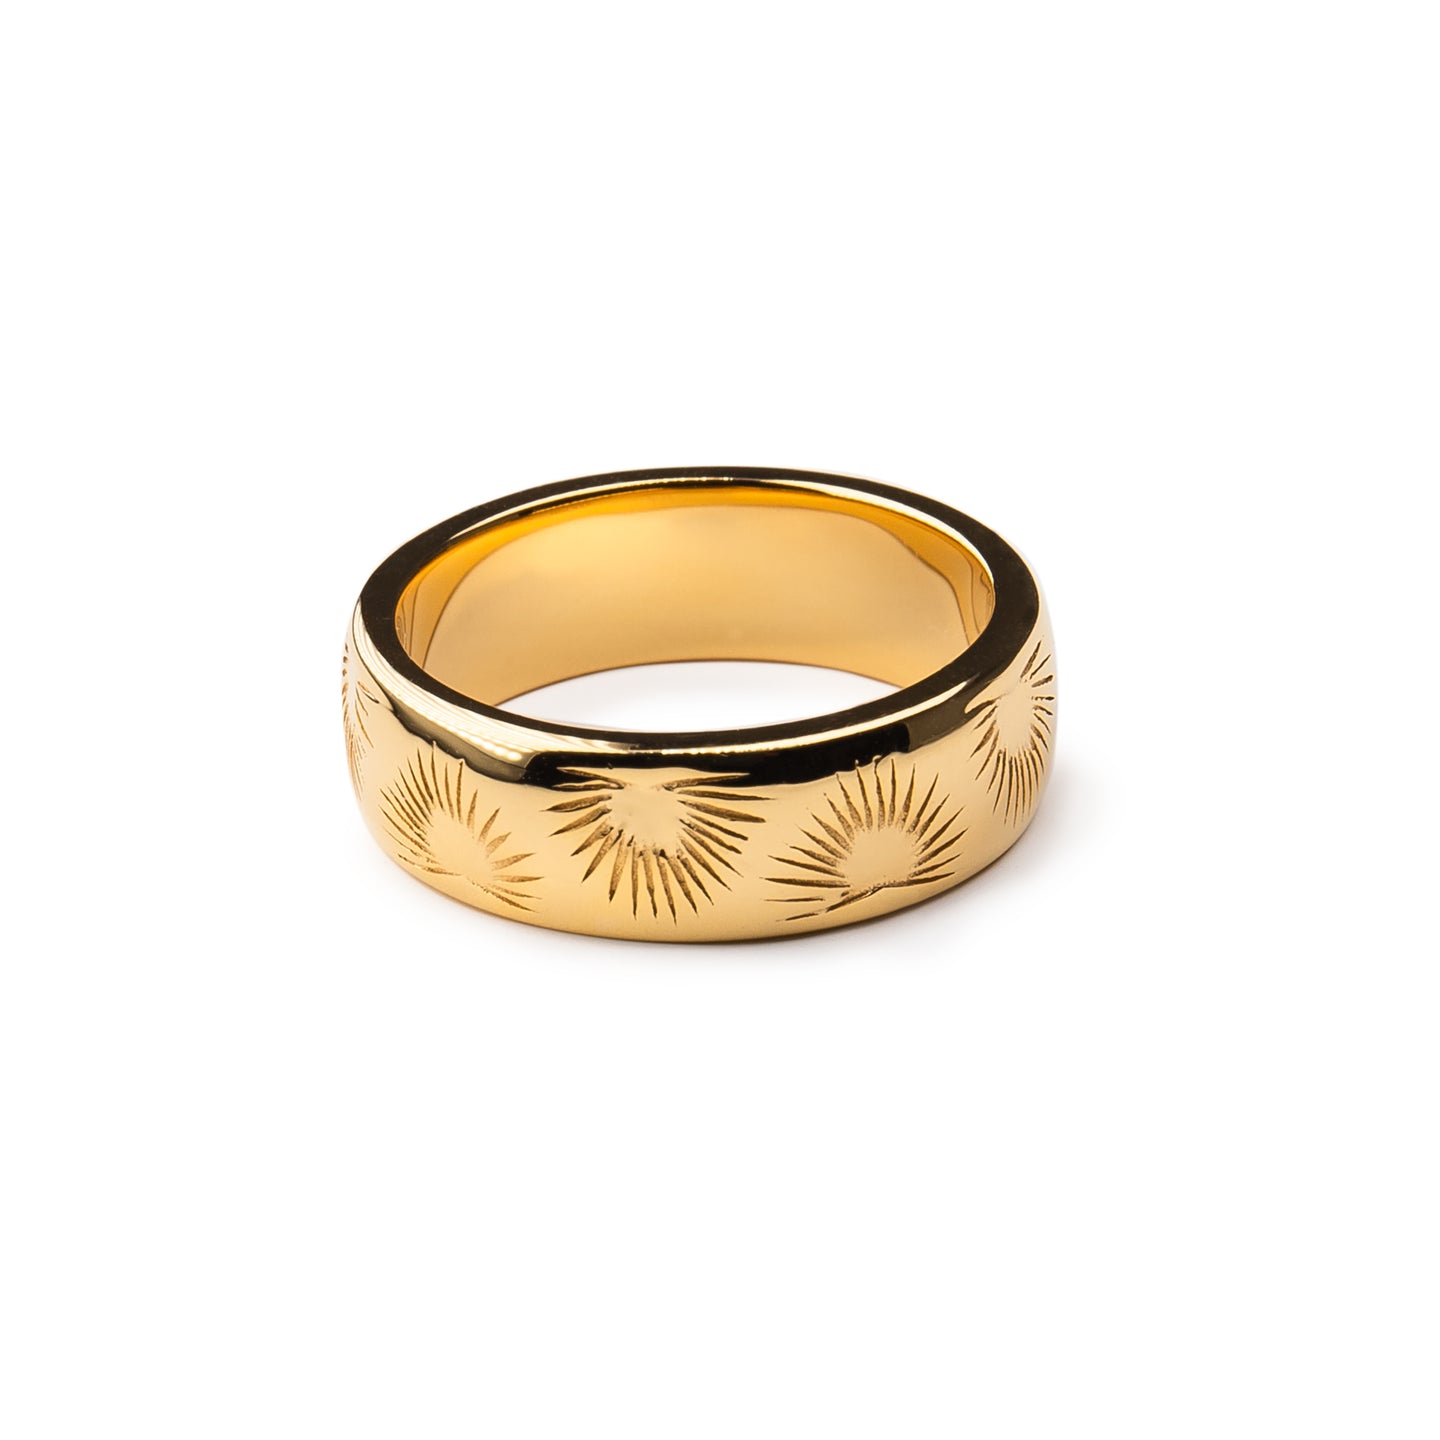 Chunky Palm Band Ring in 14K Gold Vermeil